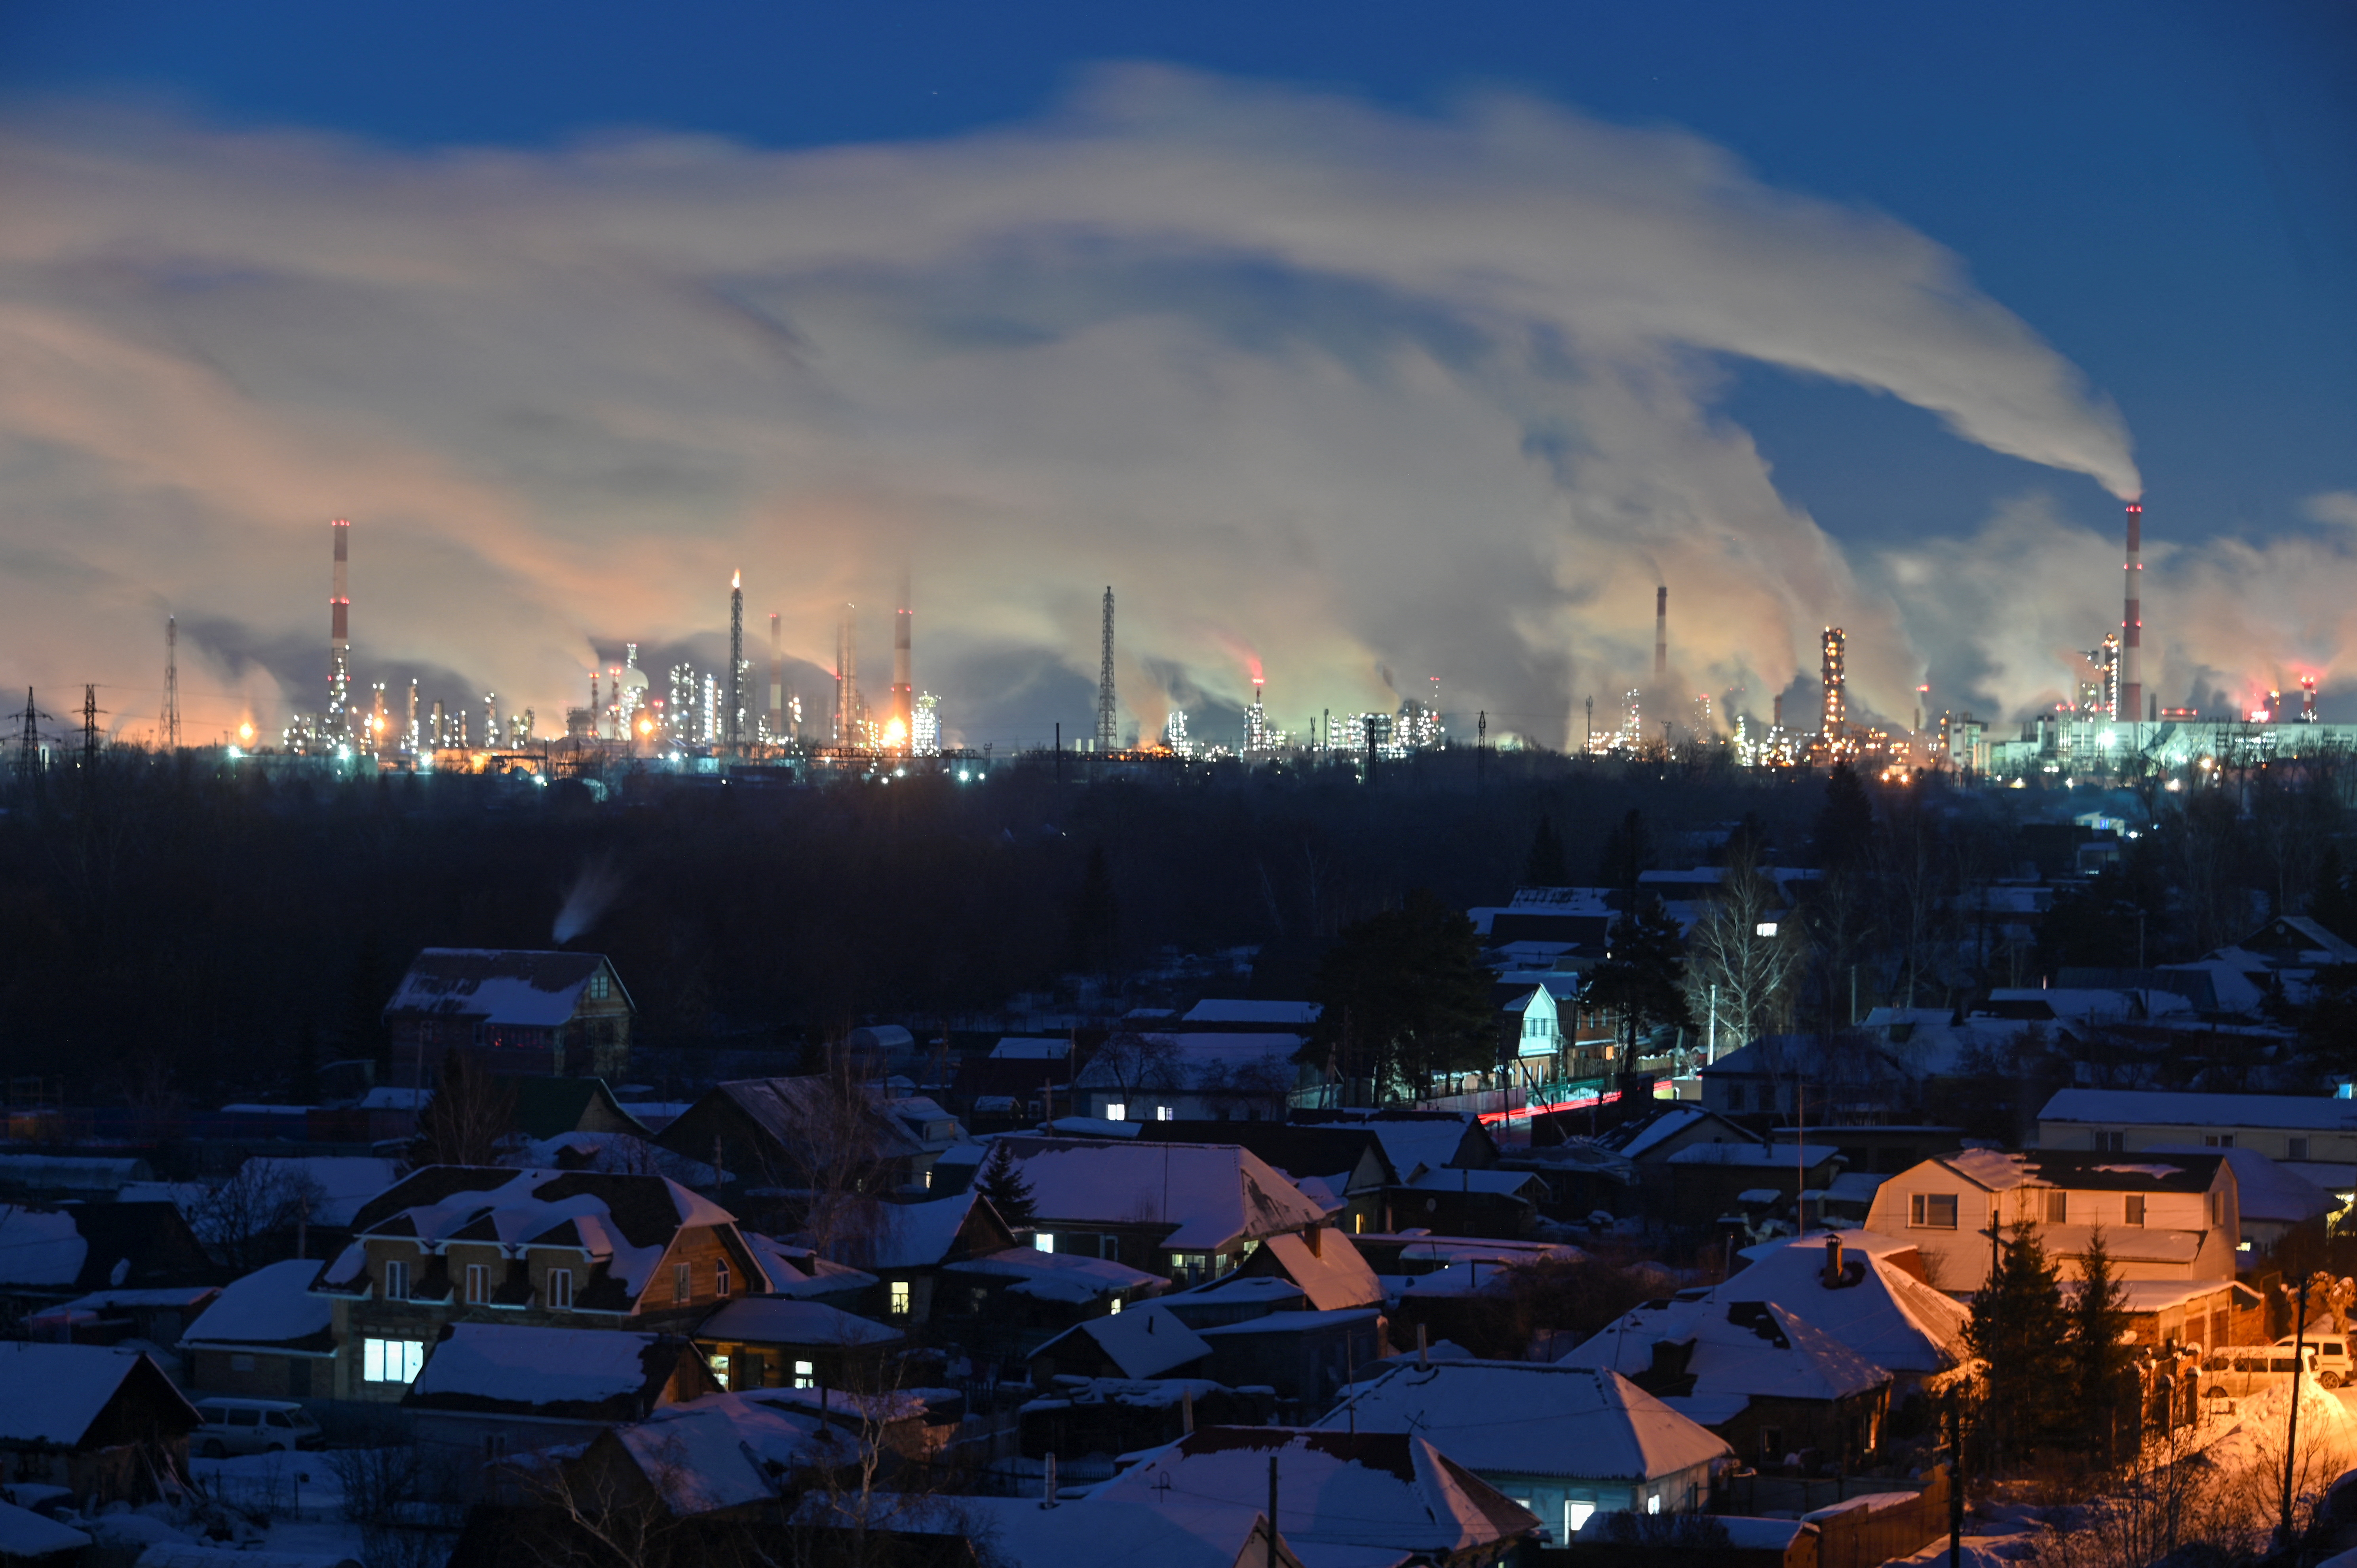 Flue gas and steam rise out of chimneys of an oil refinery in Omsk